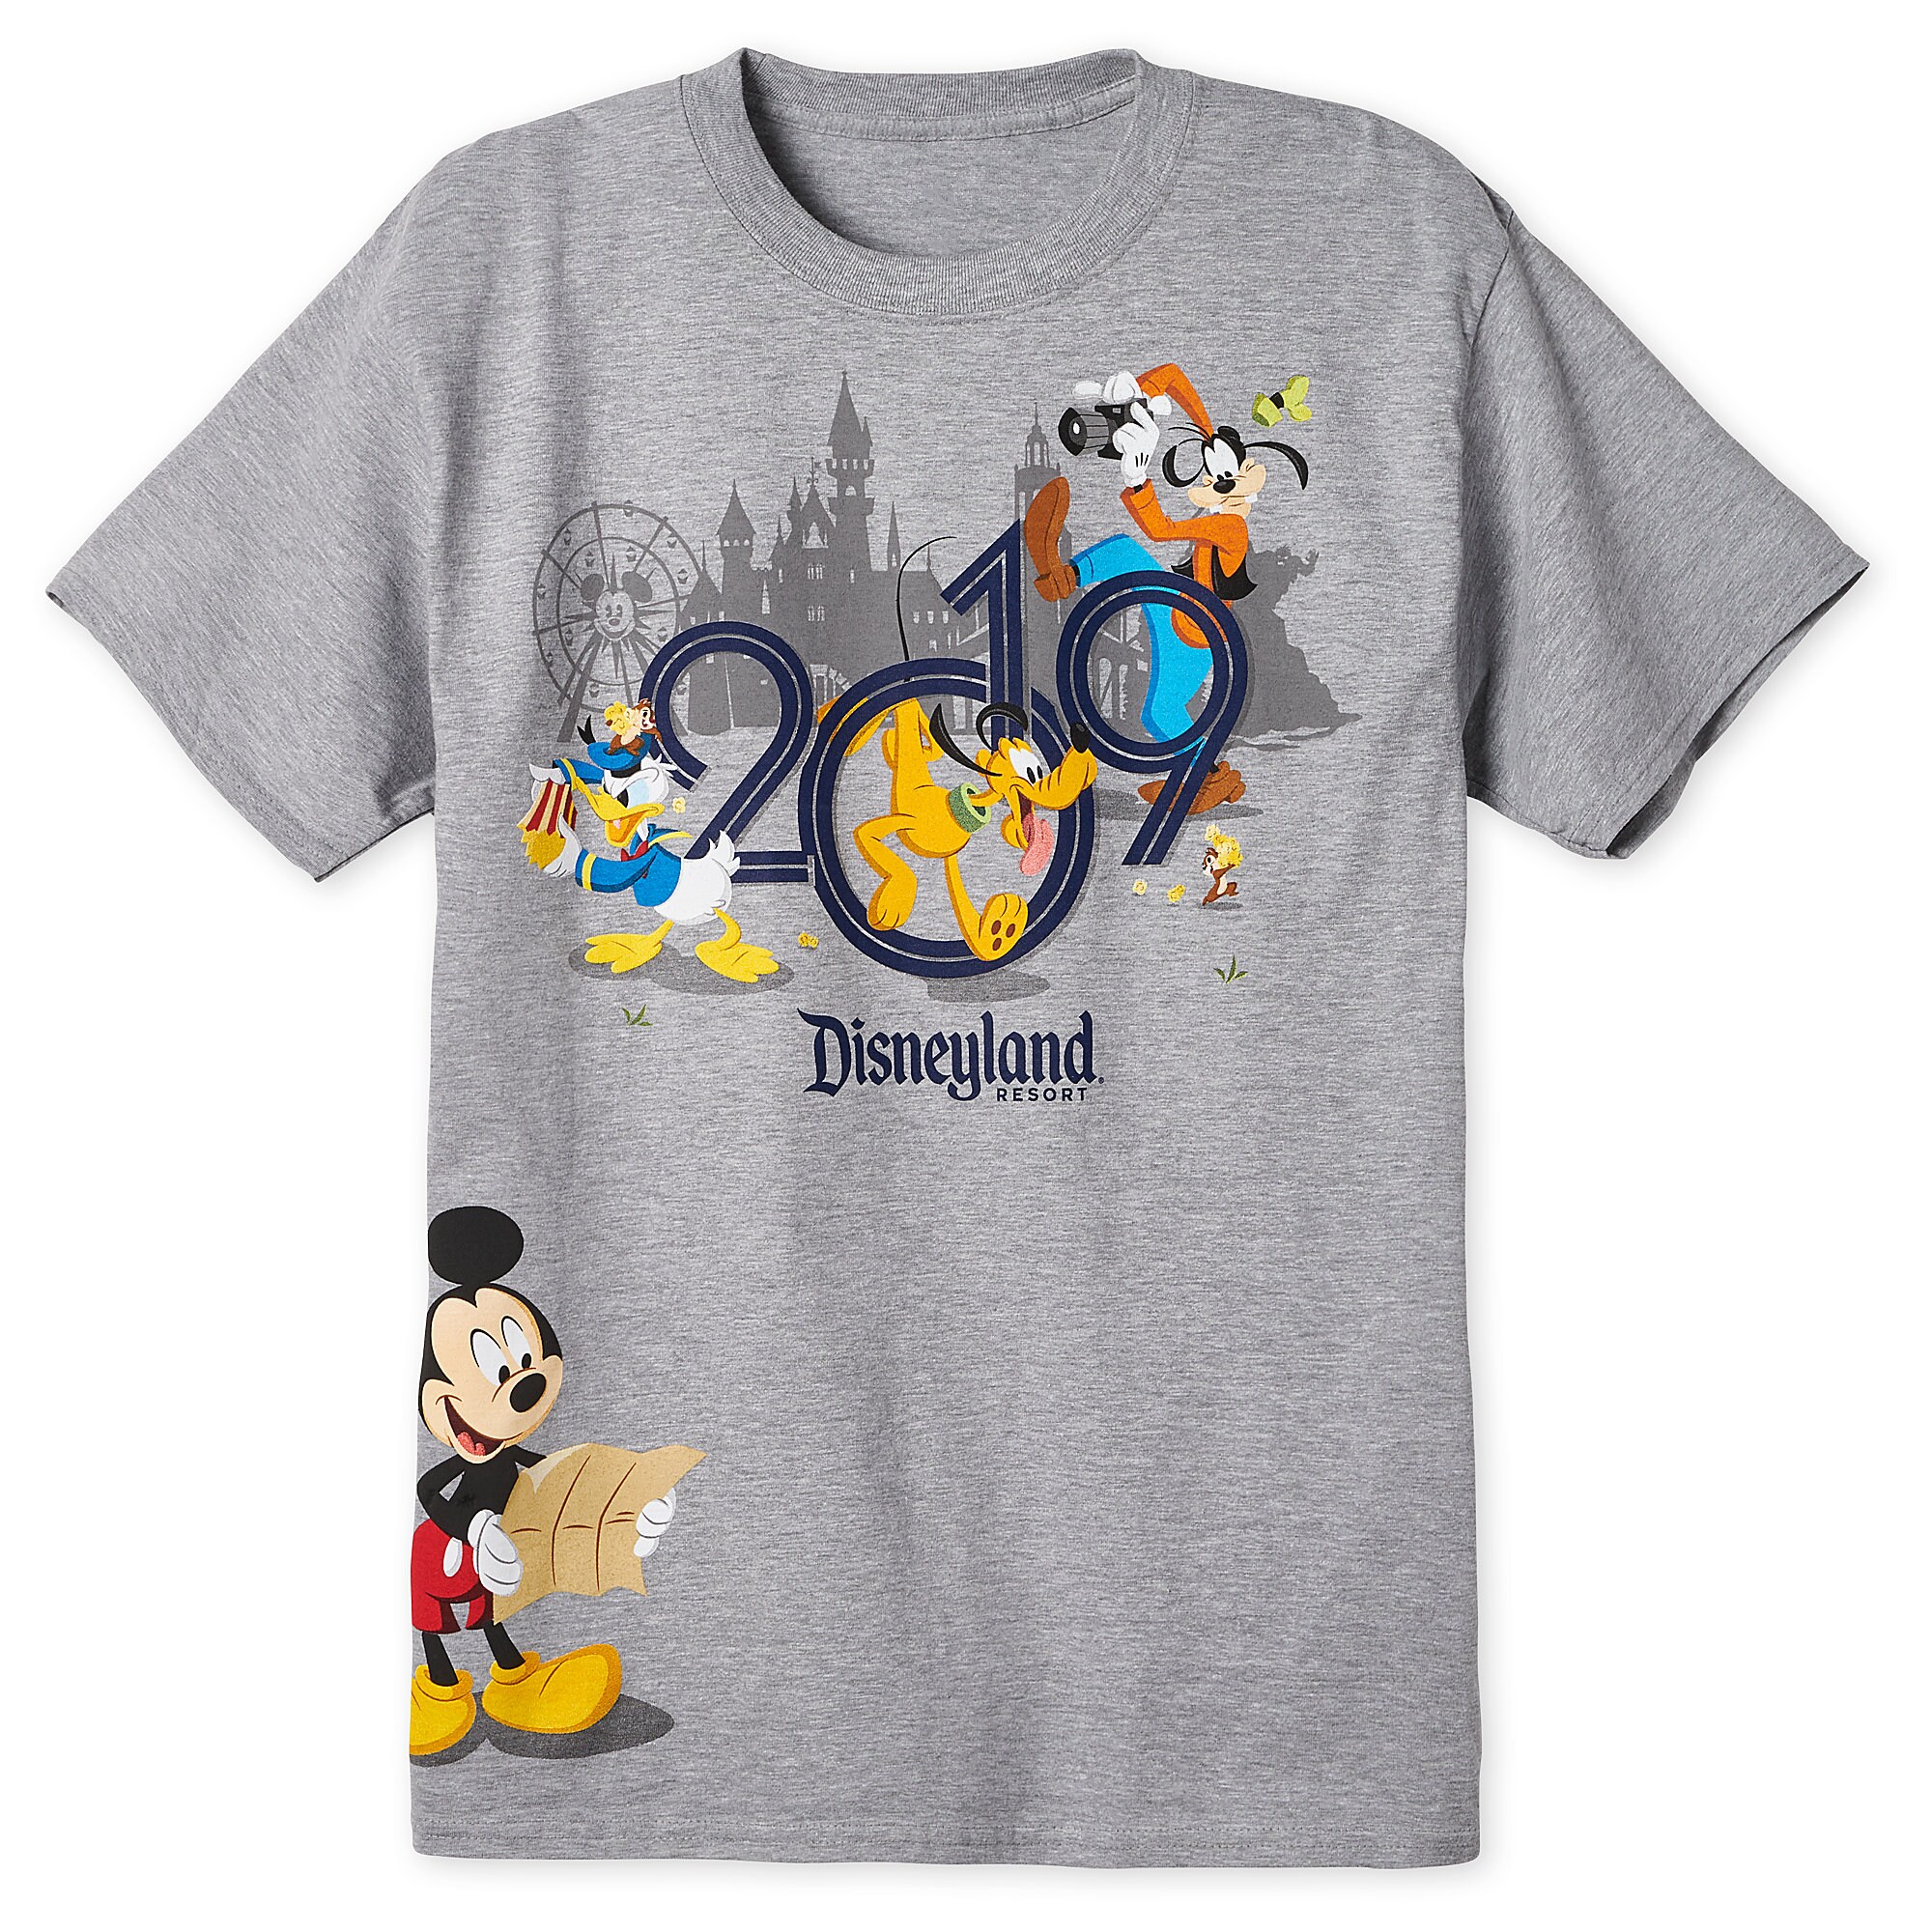 Mickey Mouse and Friends T-Shirt for Adults - Disneyland 2019